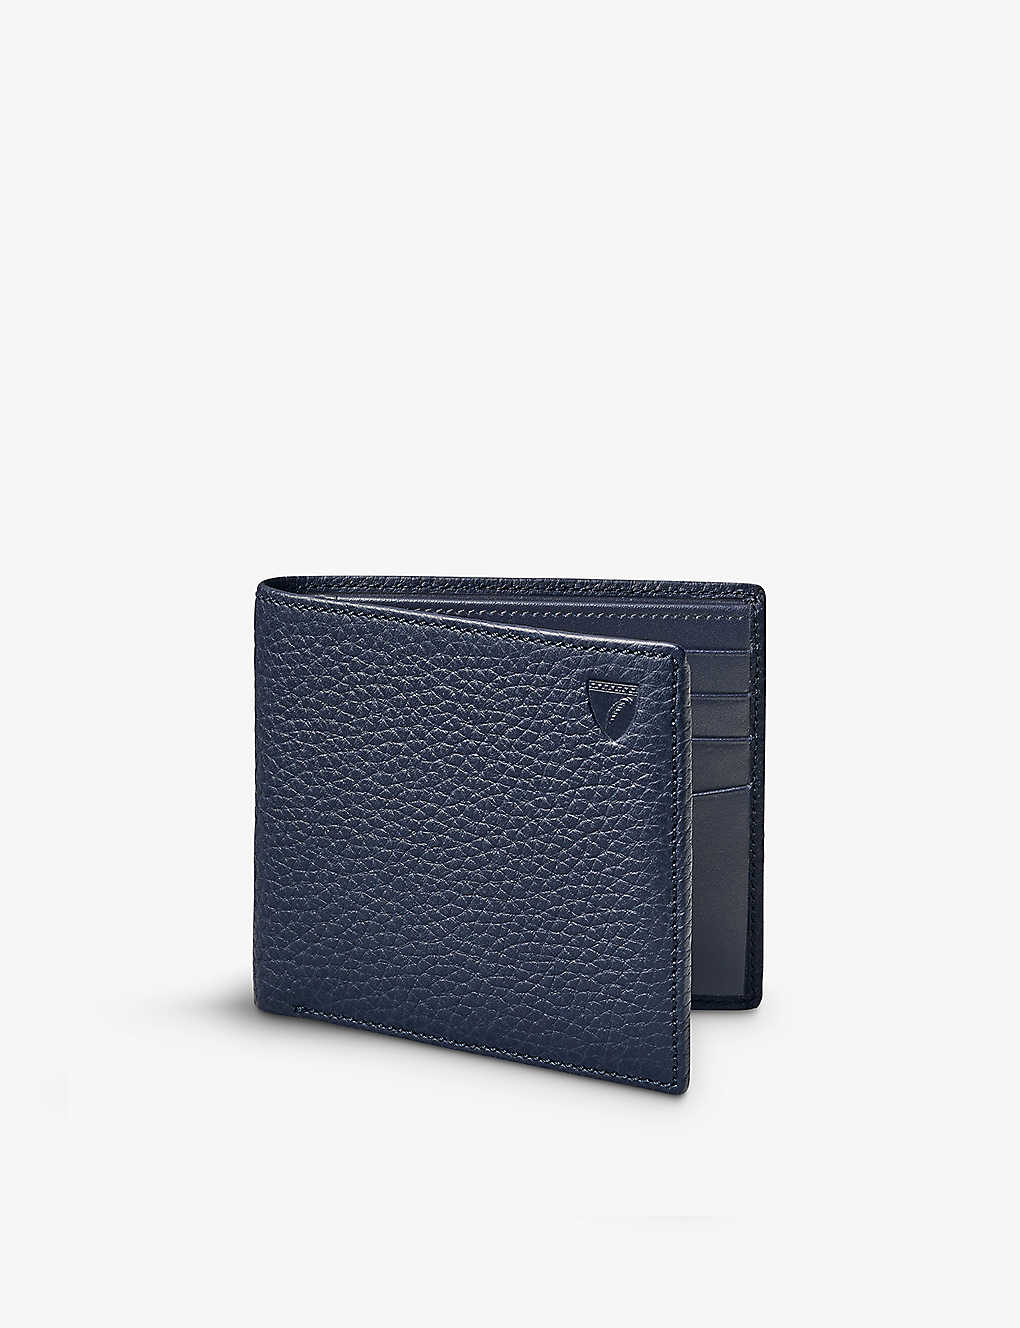 Aspinal Of London Womens Navy Billfold Eight-card Leather Wallet